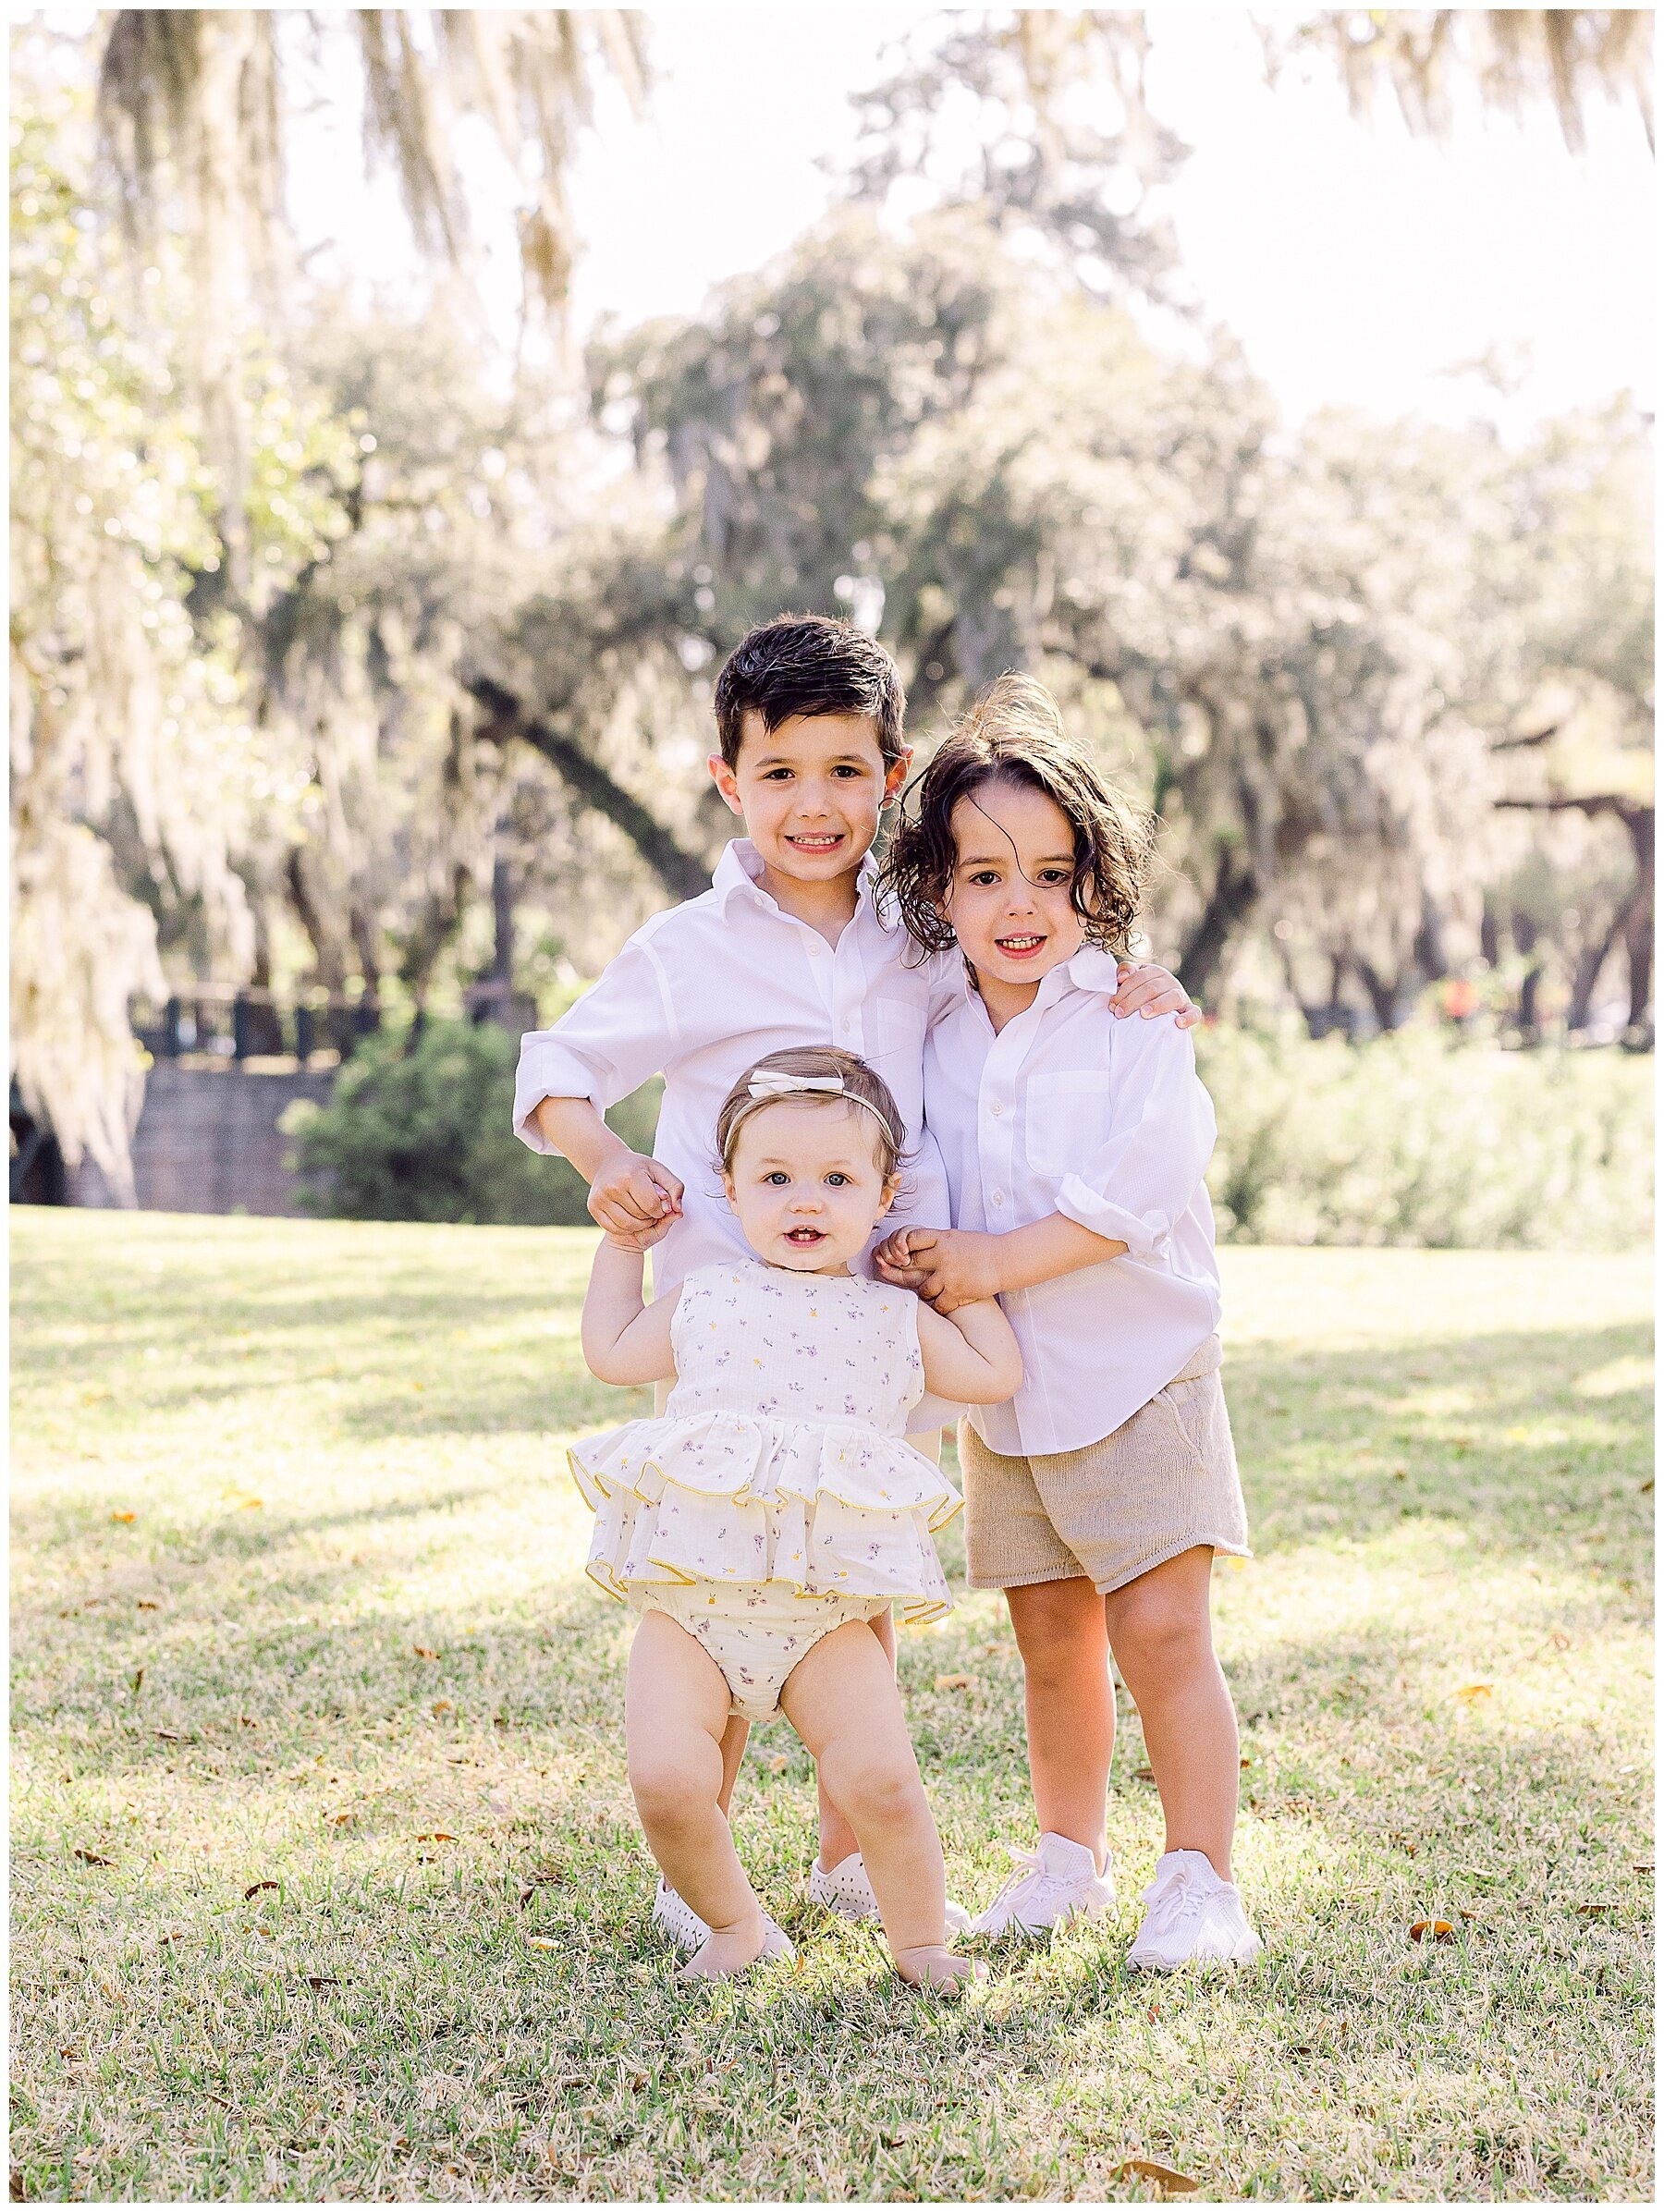 Katherine_Ives_Photography_Sallah_Palmetto_Bluff_Family_Session_4.JPG